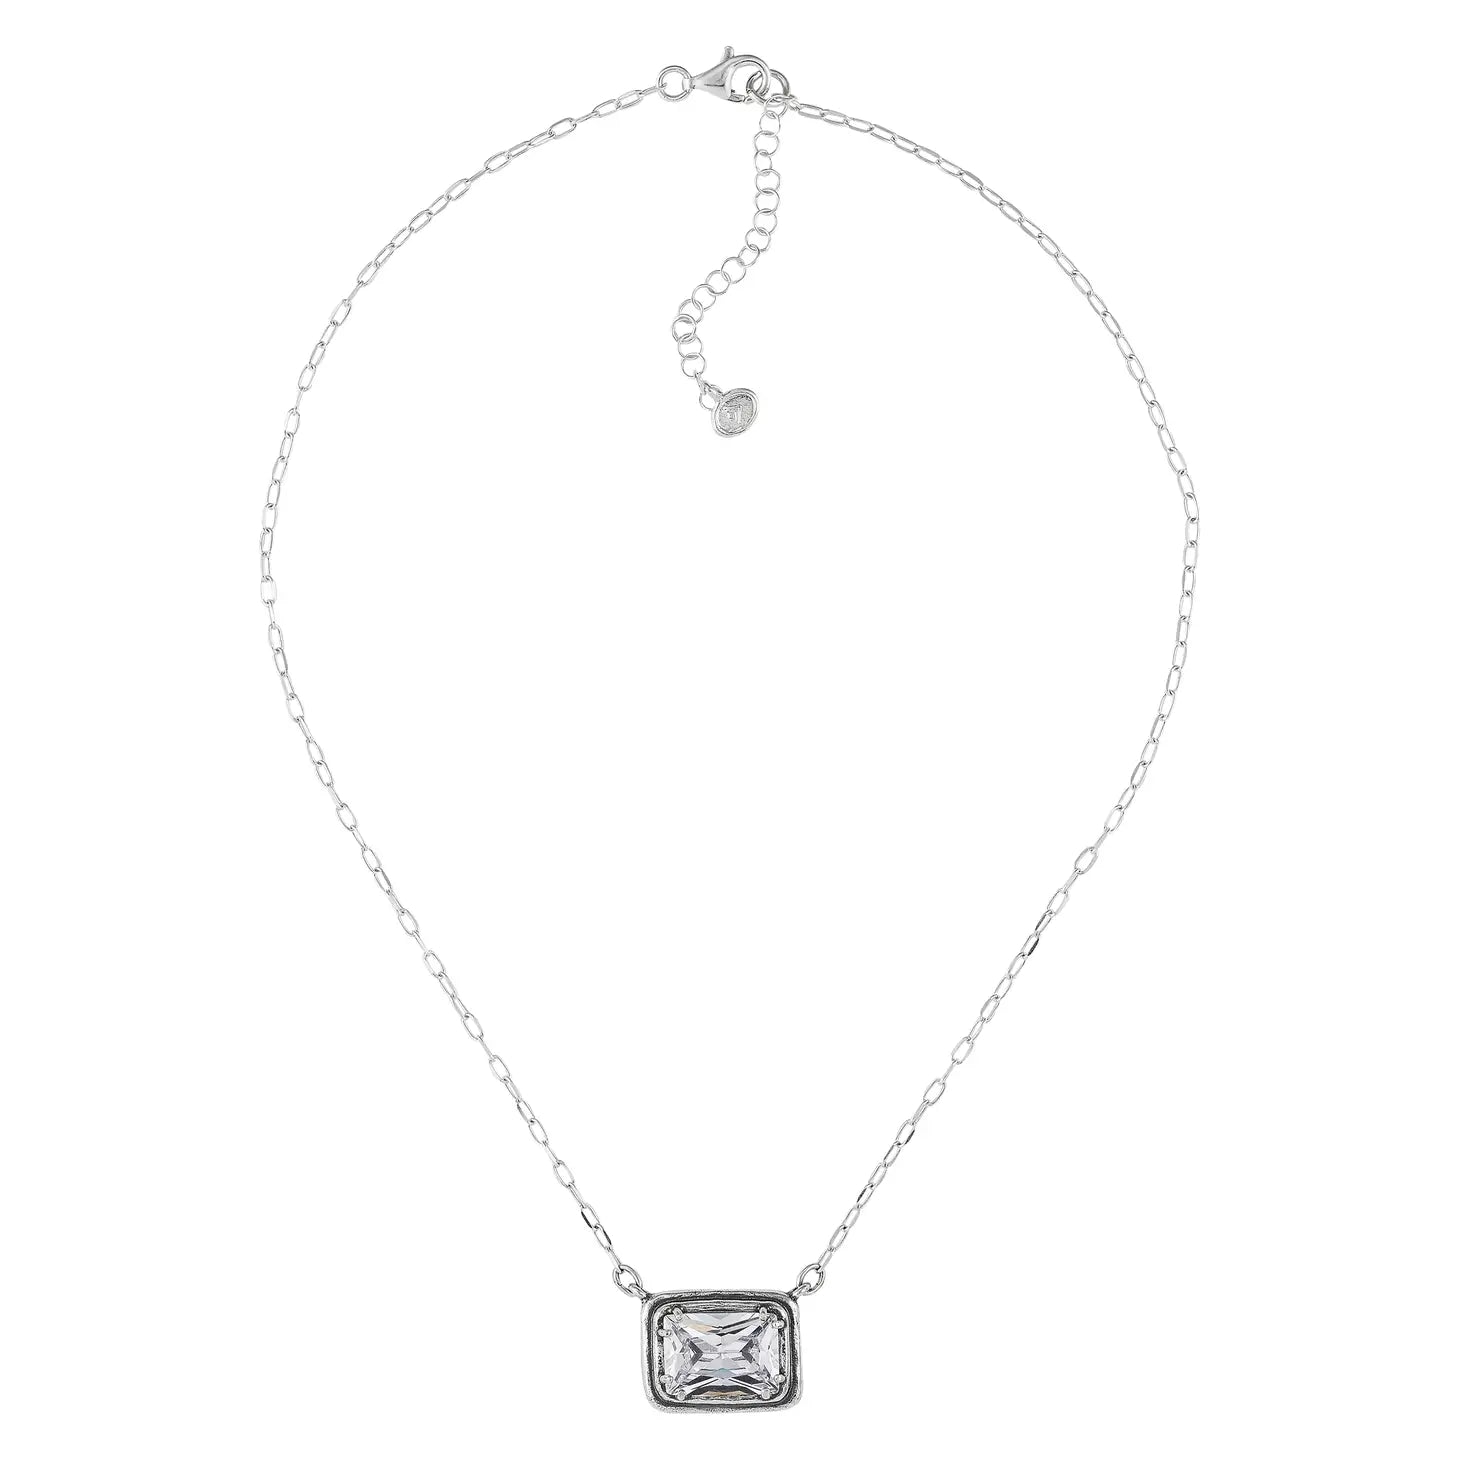 Fabulous Shine Sterling Silver Necklace